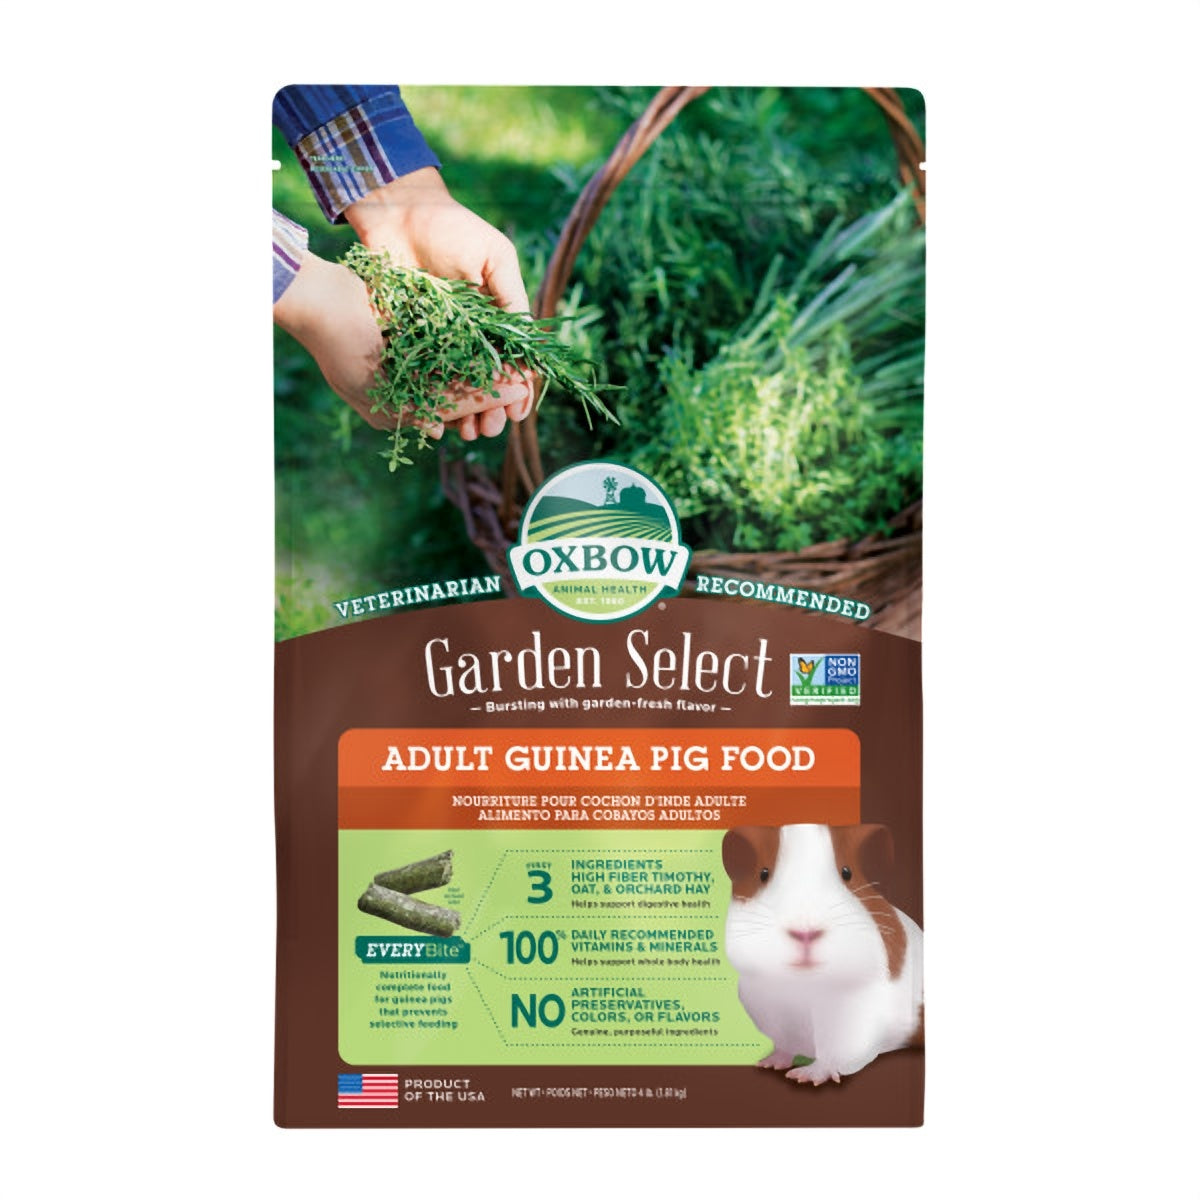 Oxbow Garden Select Adult Guinea Pig Food 1.18kg